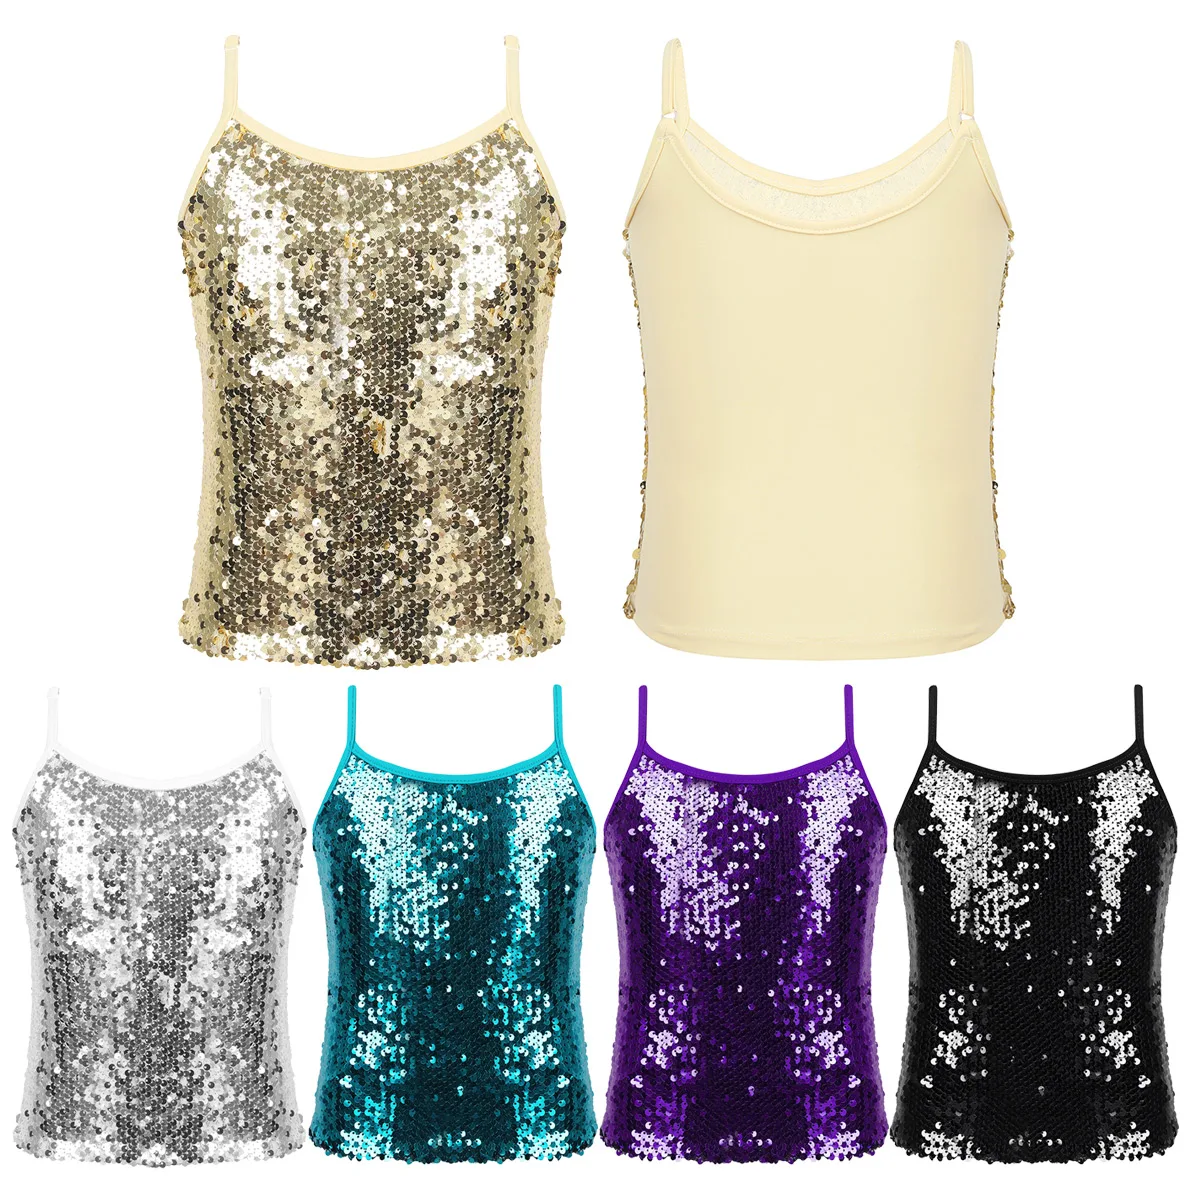 

Kids Girls Shiny Sequined Tops Vest Jazz Dance Camisole Tanks Top for Ballet Dancing Stage Performance Clothing Streetwear 2023